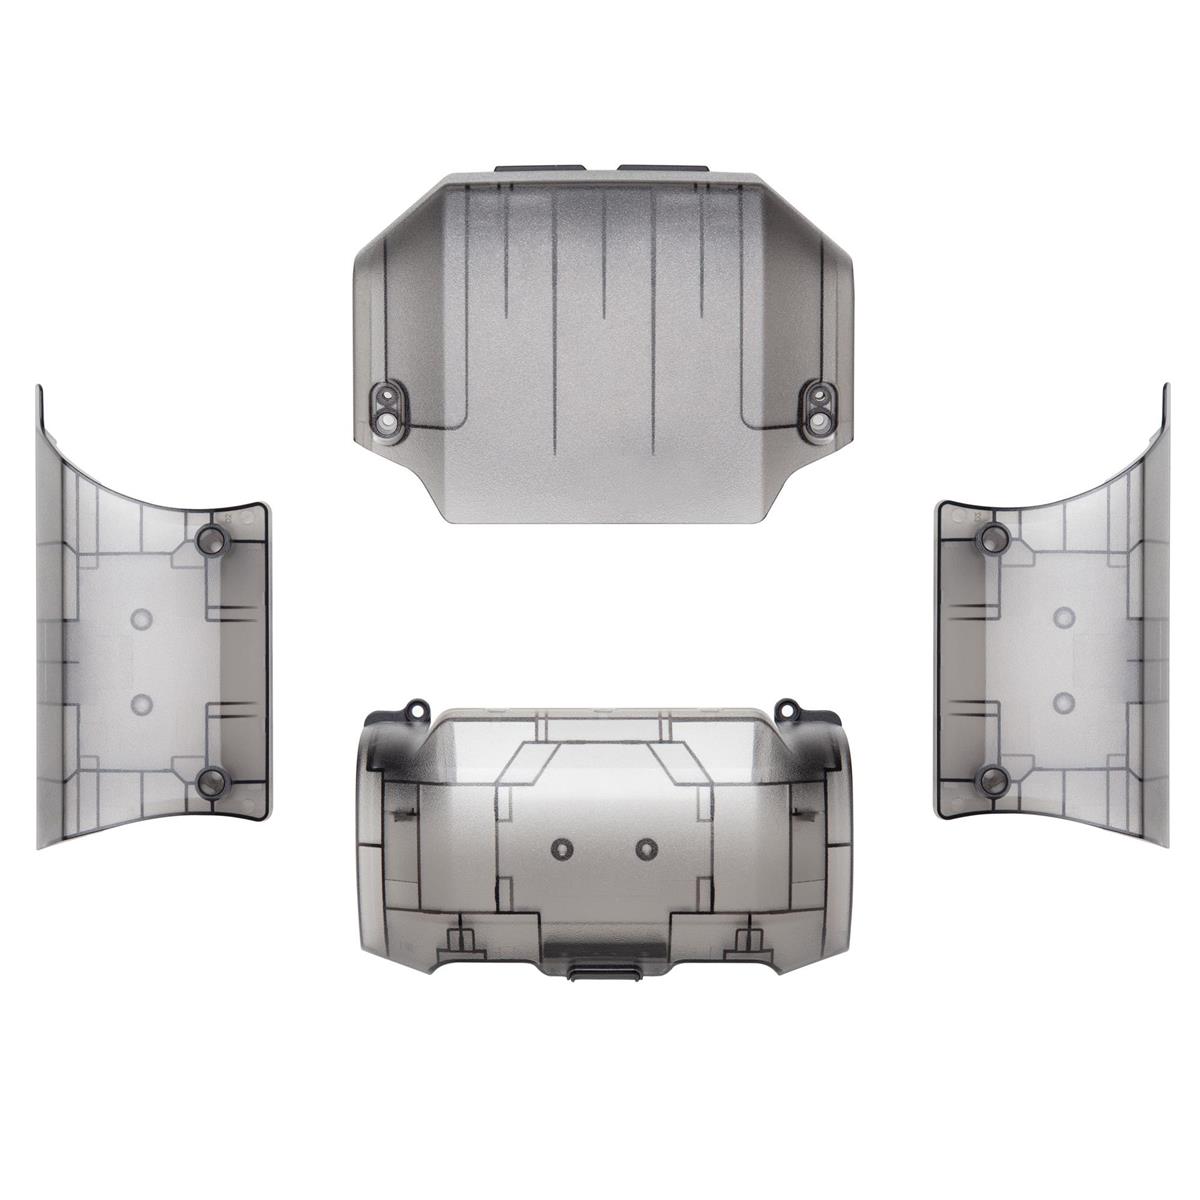 Image of DJI RoboMaster S1 PART1 Chassis Armor Kit